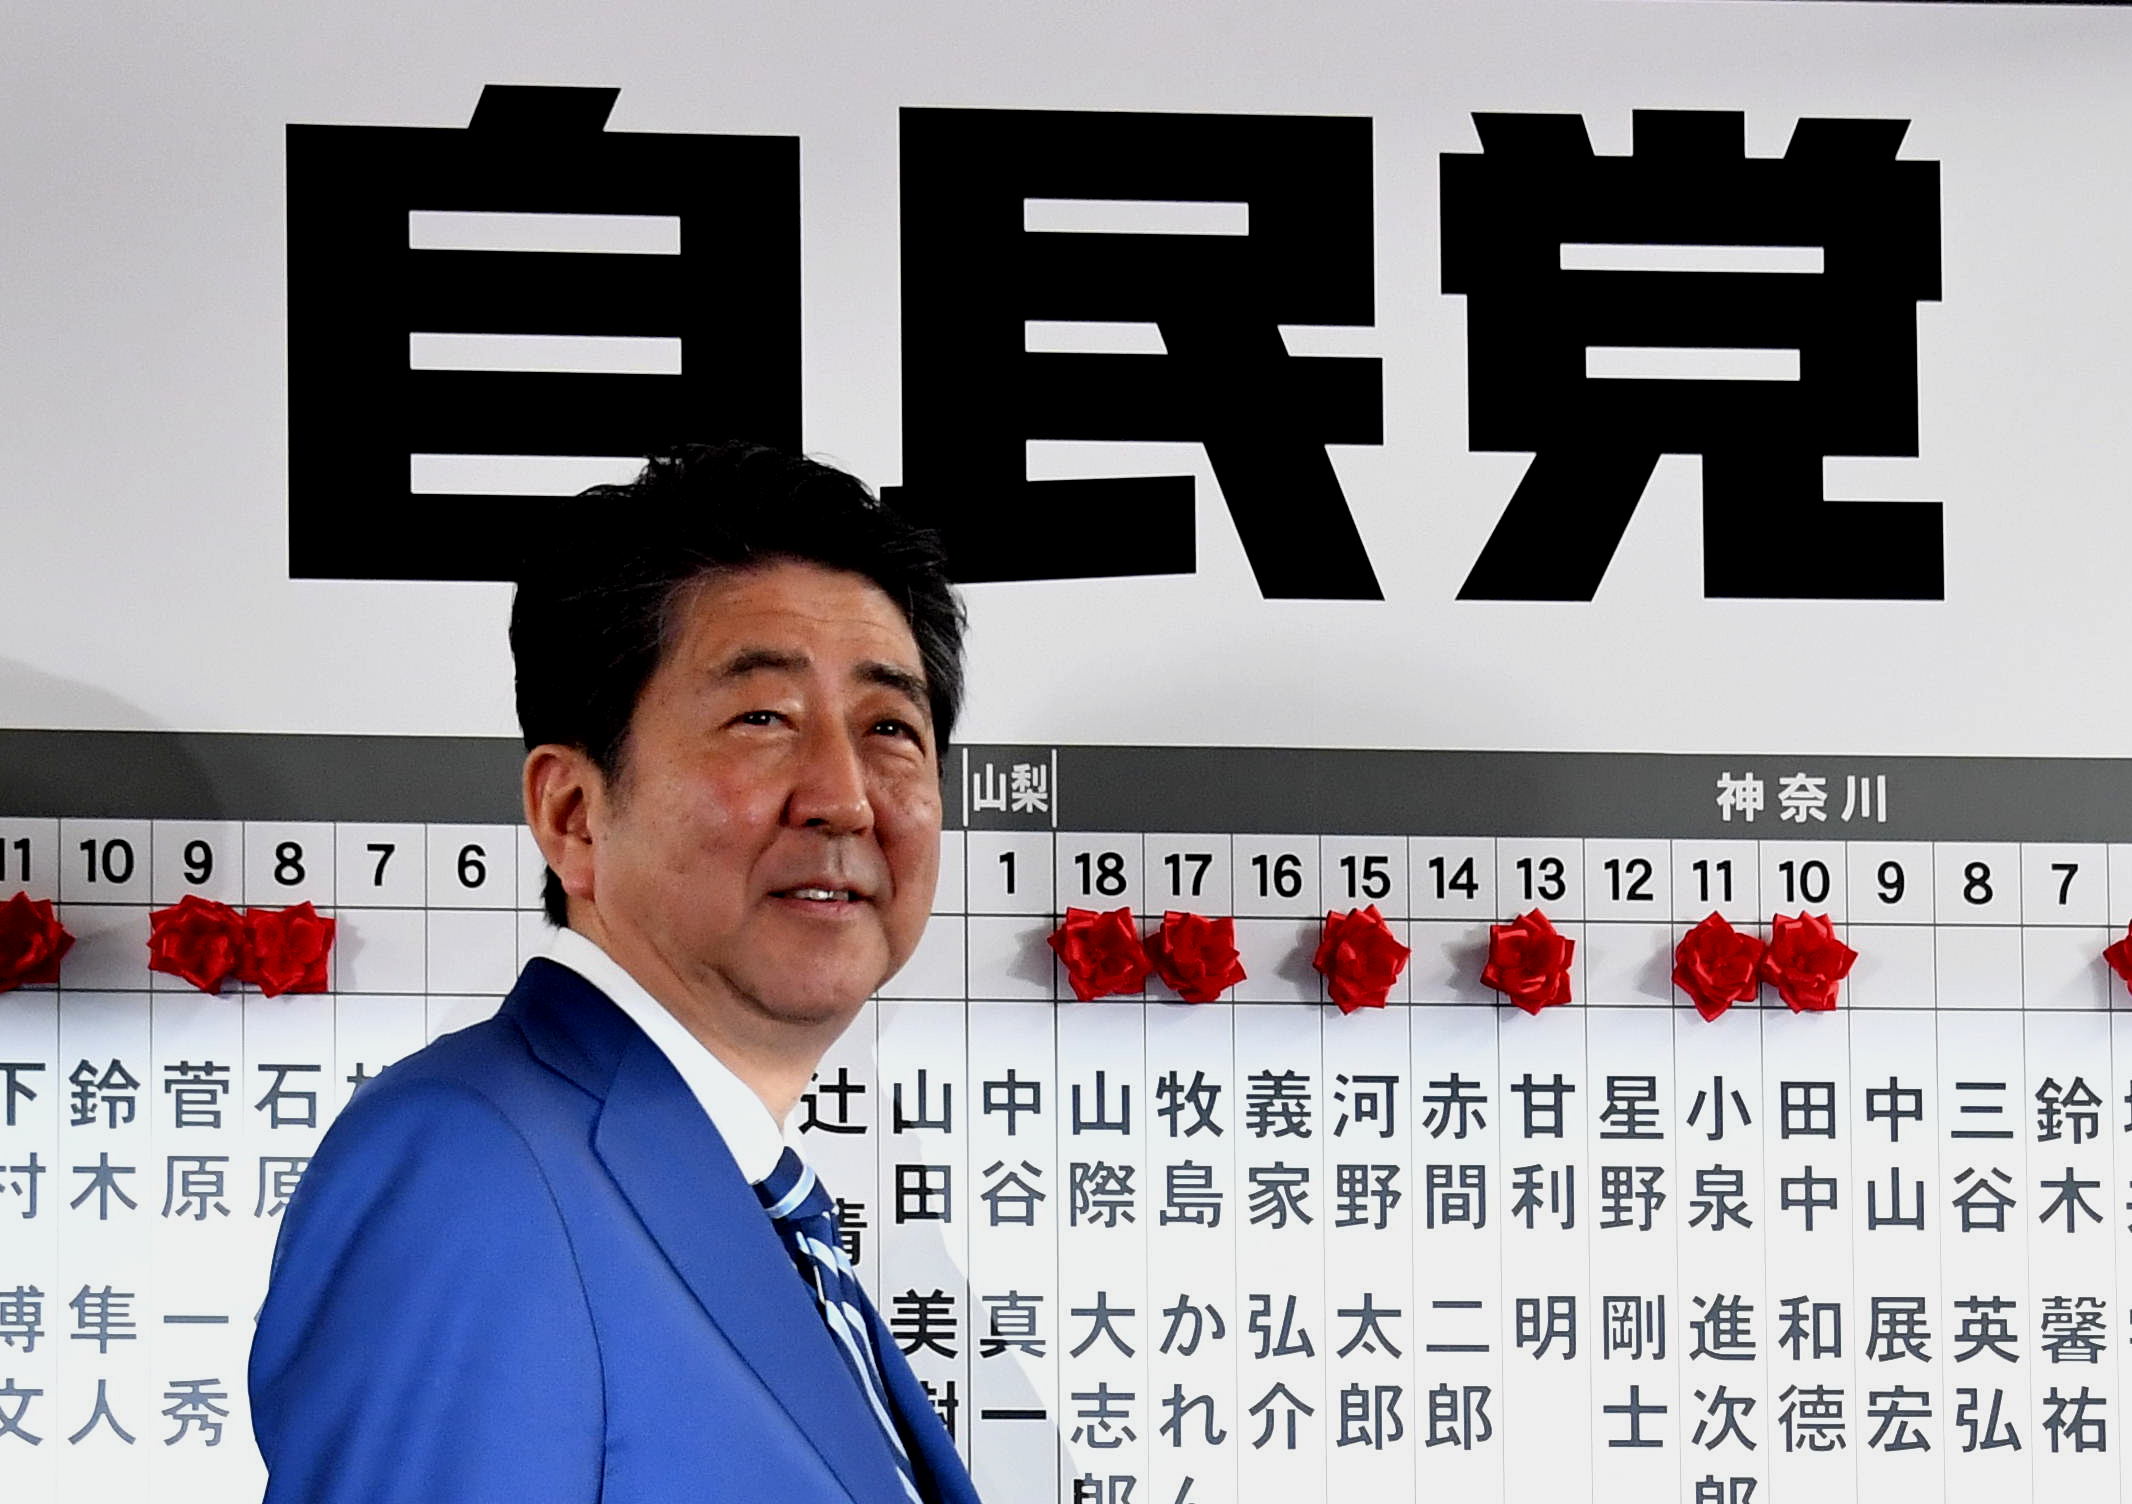 Prime Minister Shinzo Abe smiles before a board of candidates with paper roses who won their seats on Sunday at the Liberal Democratic Party headquarters in Tokyo. | YOSHIAKI MIURA